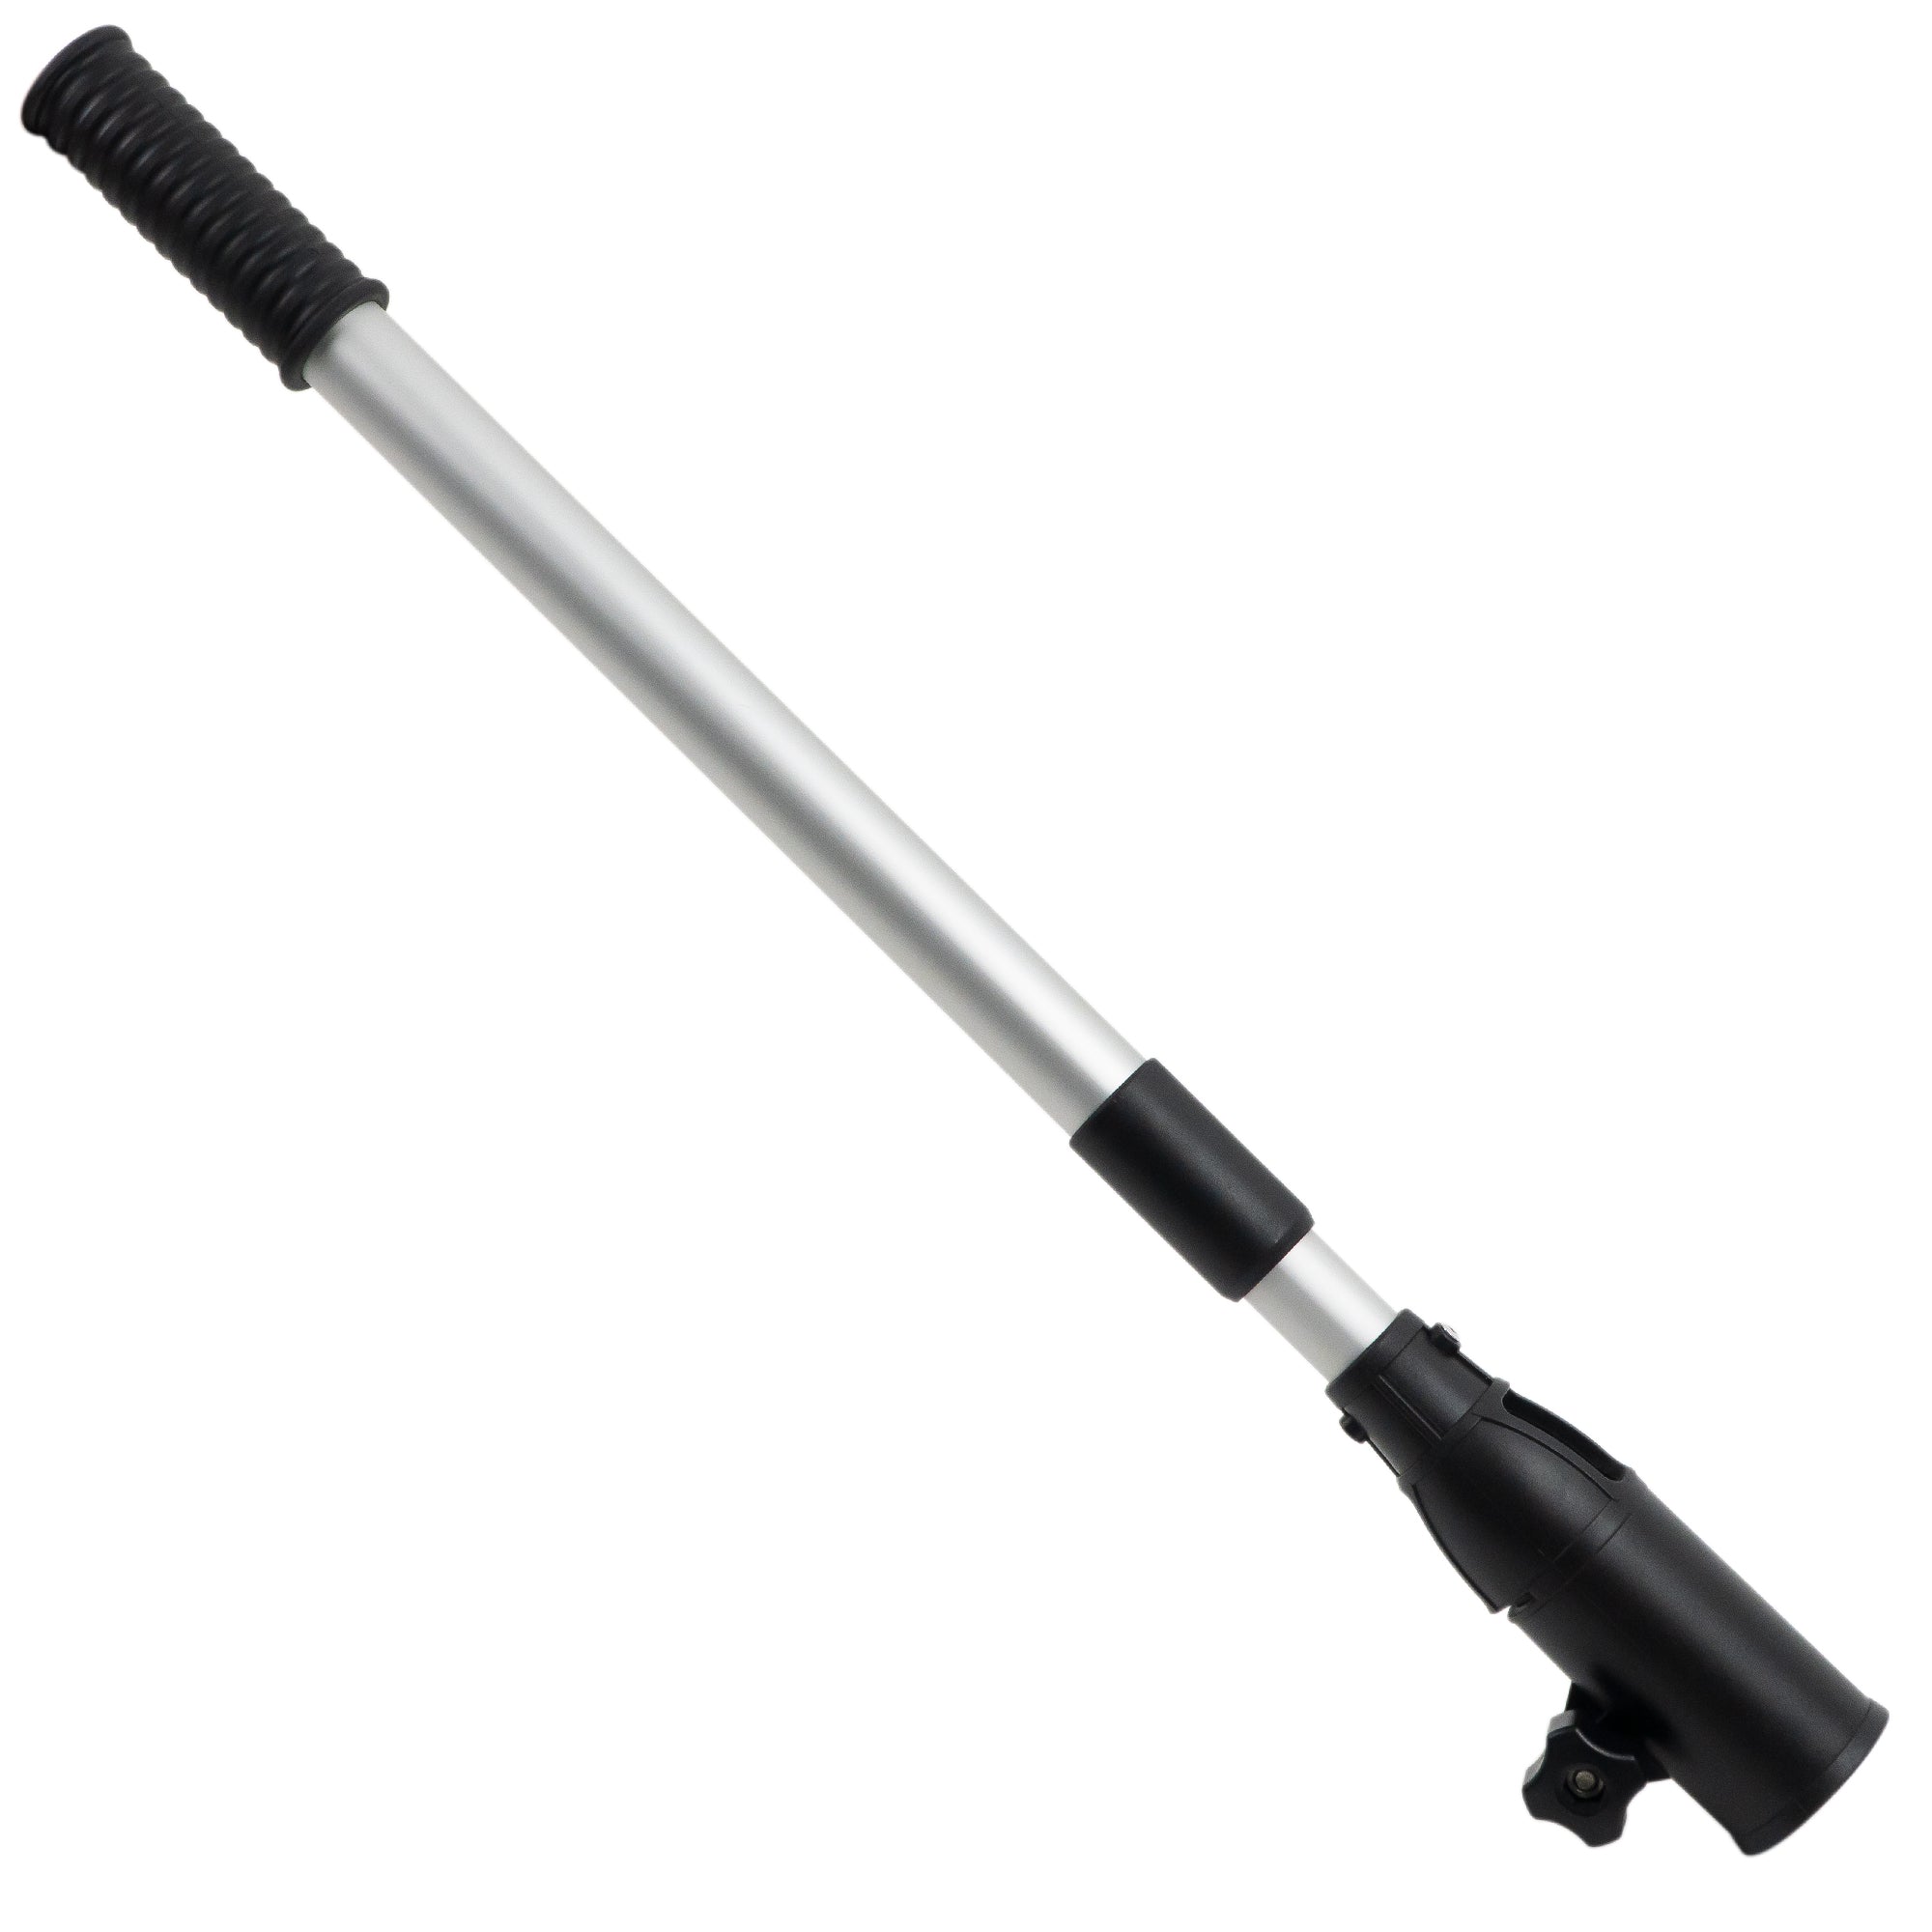 Tiller Handle Extension for Outboard, Extends from 25" to 40" - FO4455